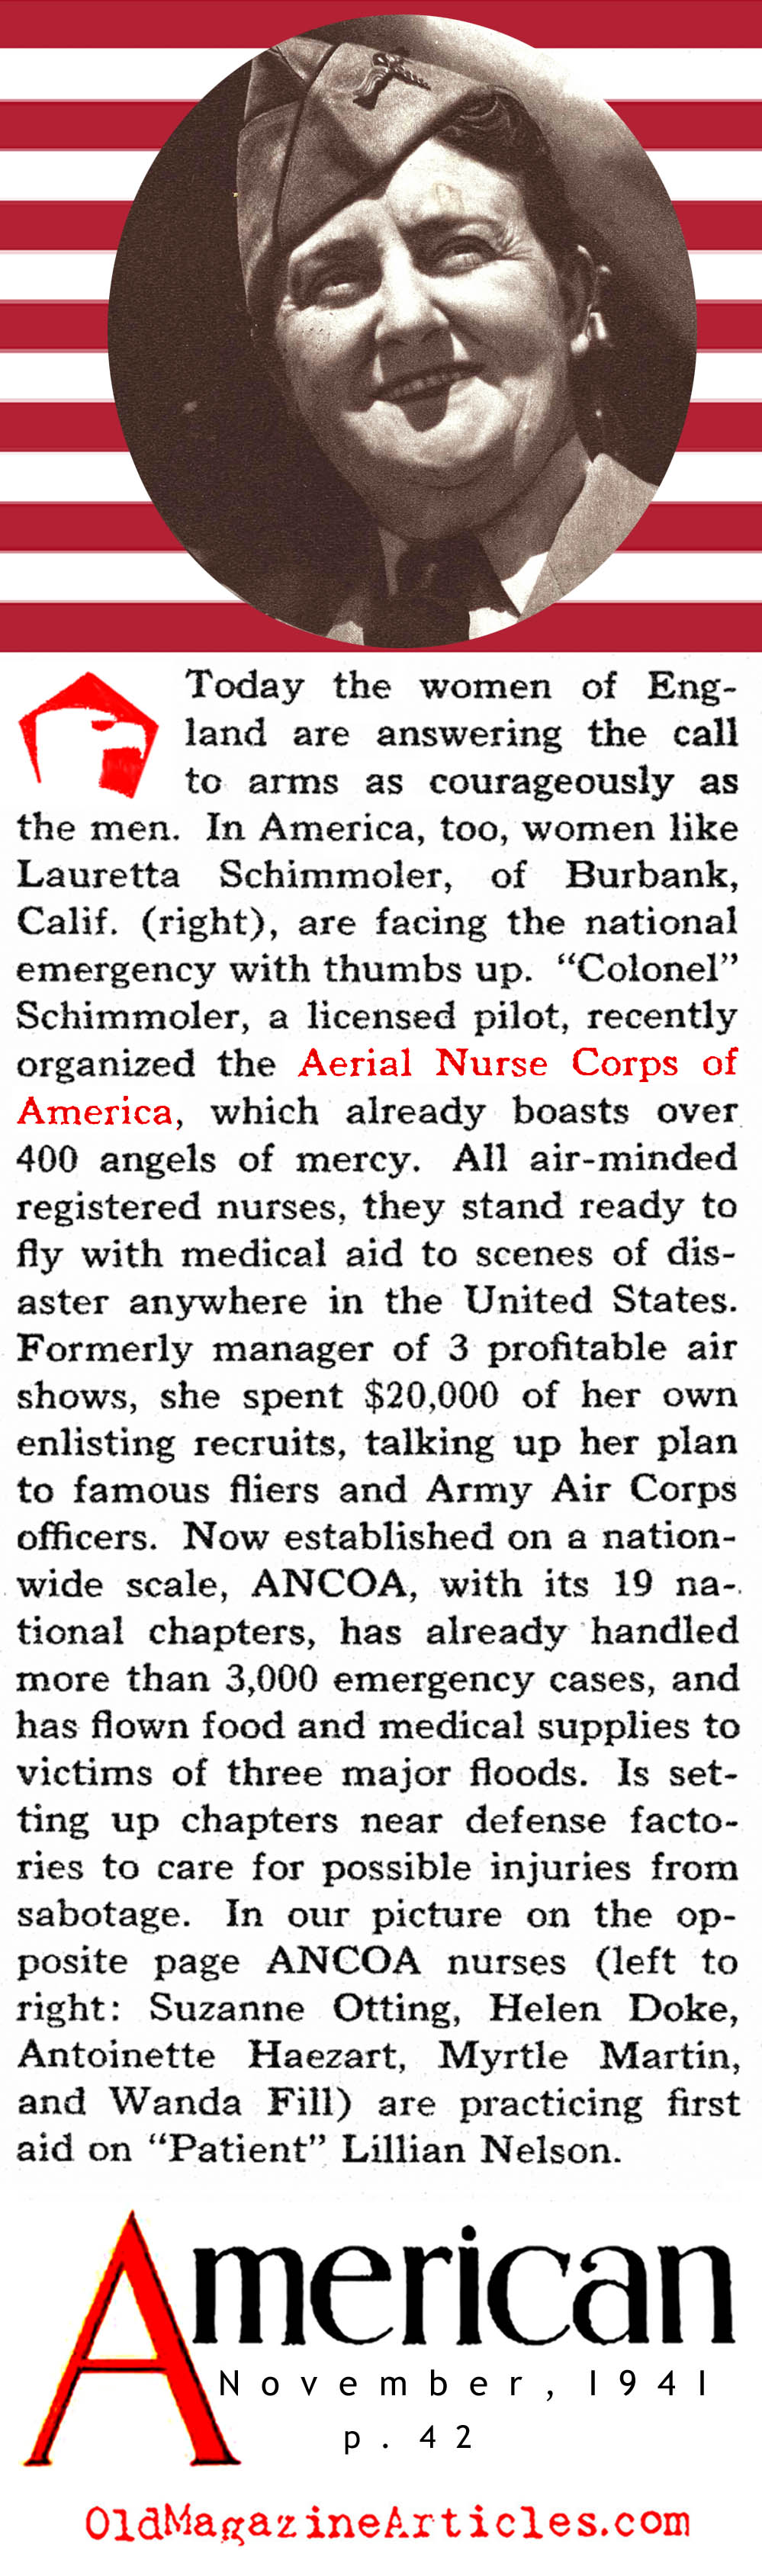 The Aerial Nurse Corps of America (The American Magazine, 1941)